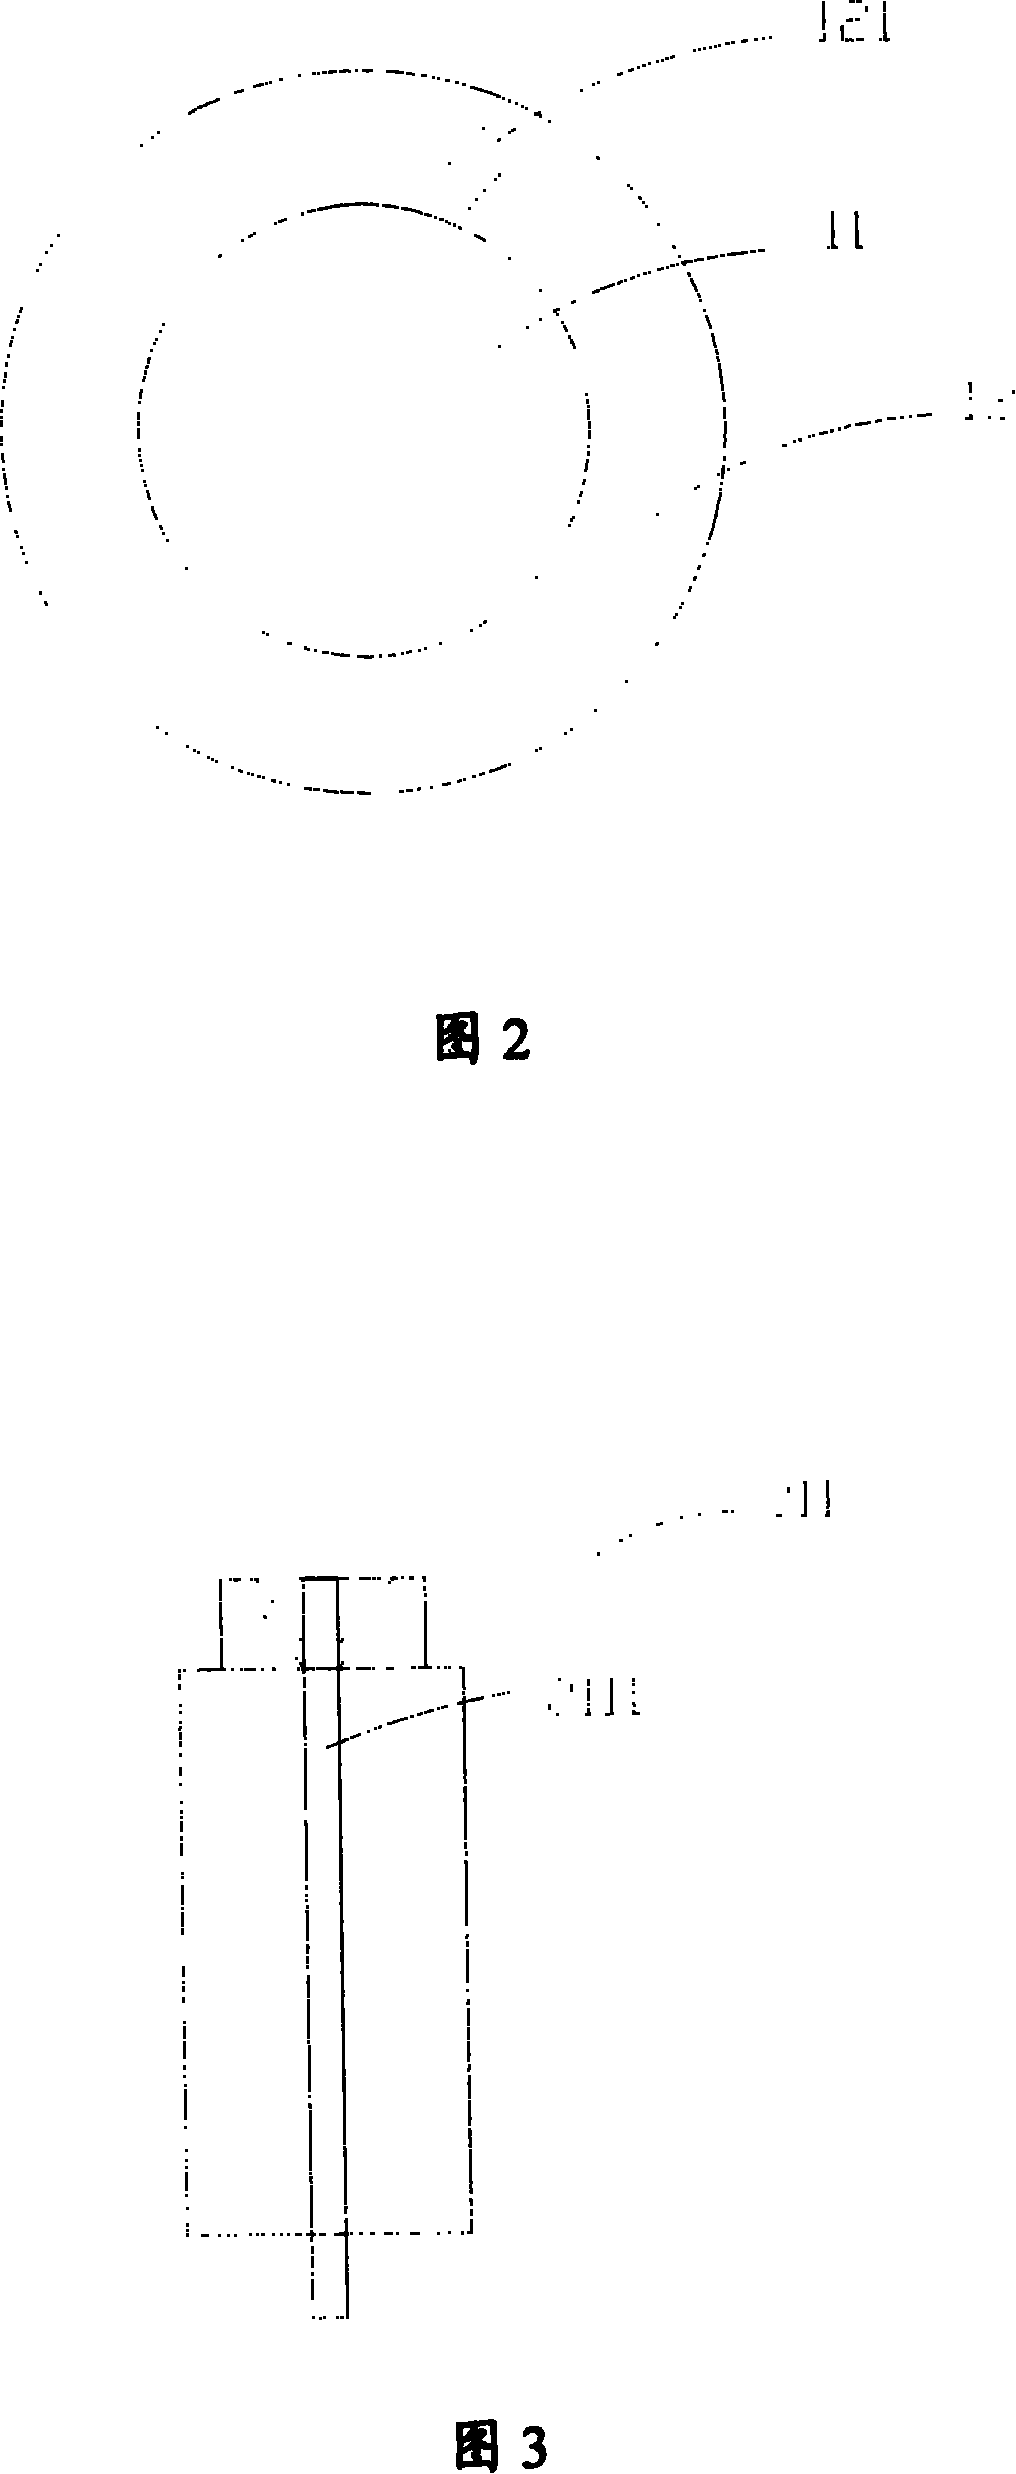 Chemical and mechanical grinding device